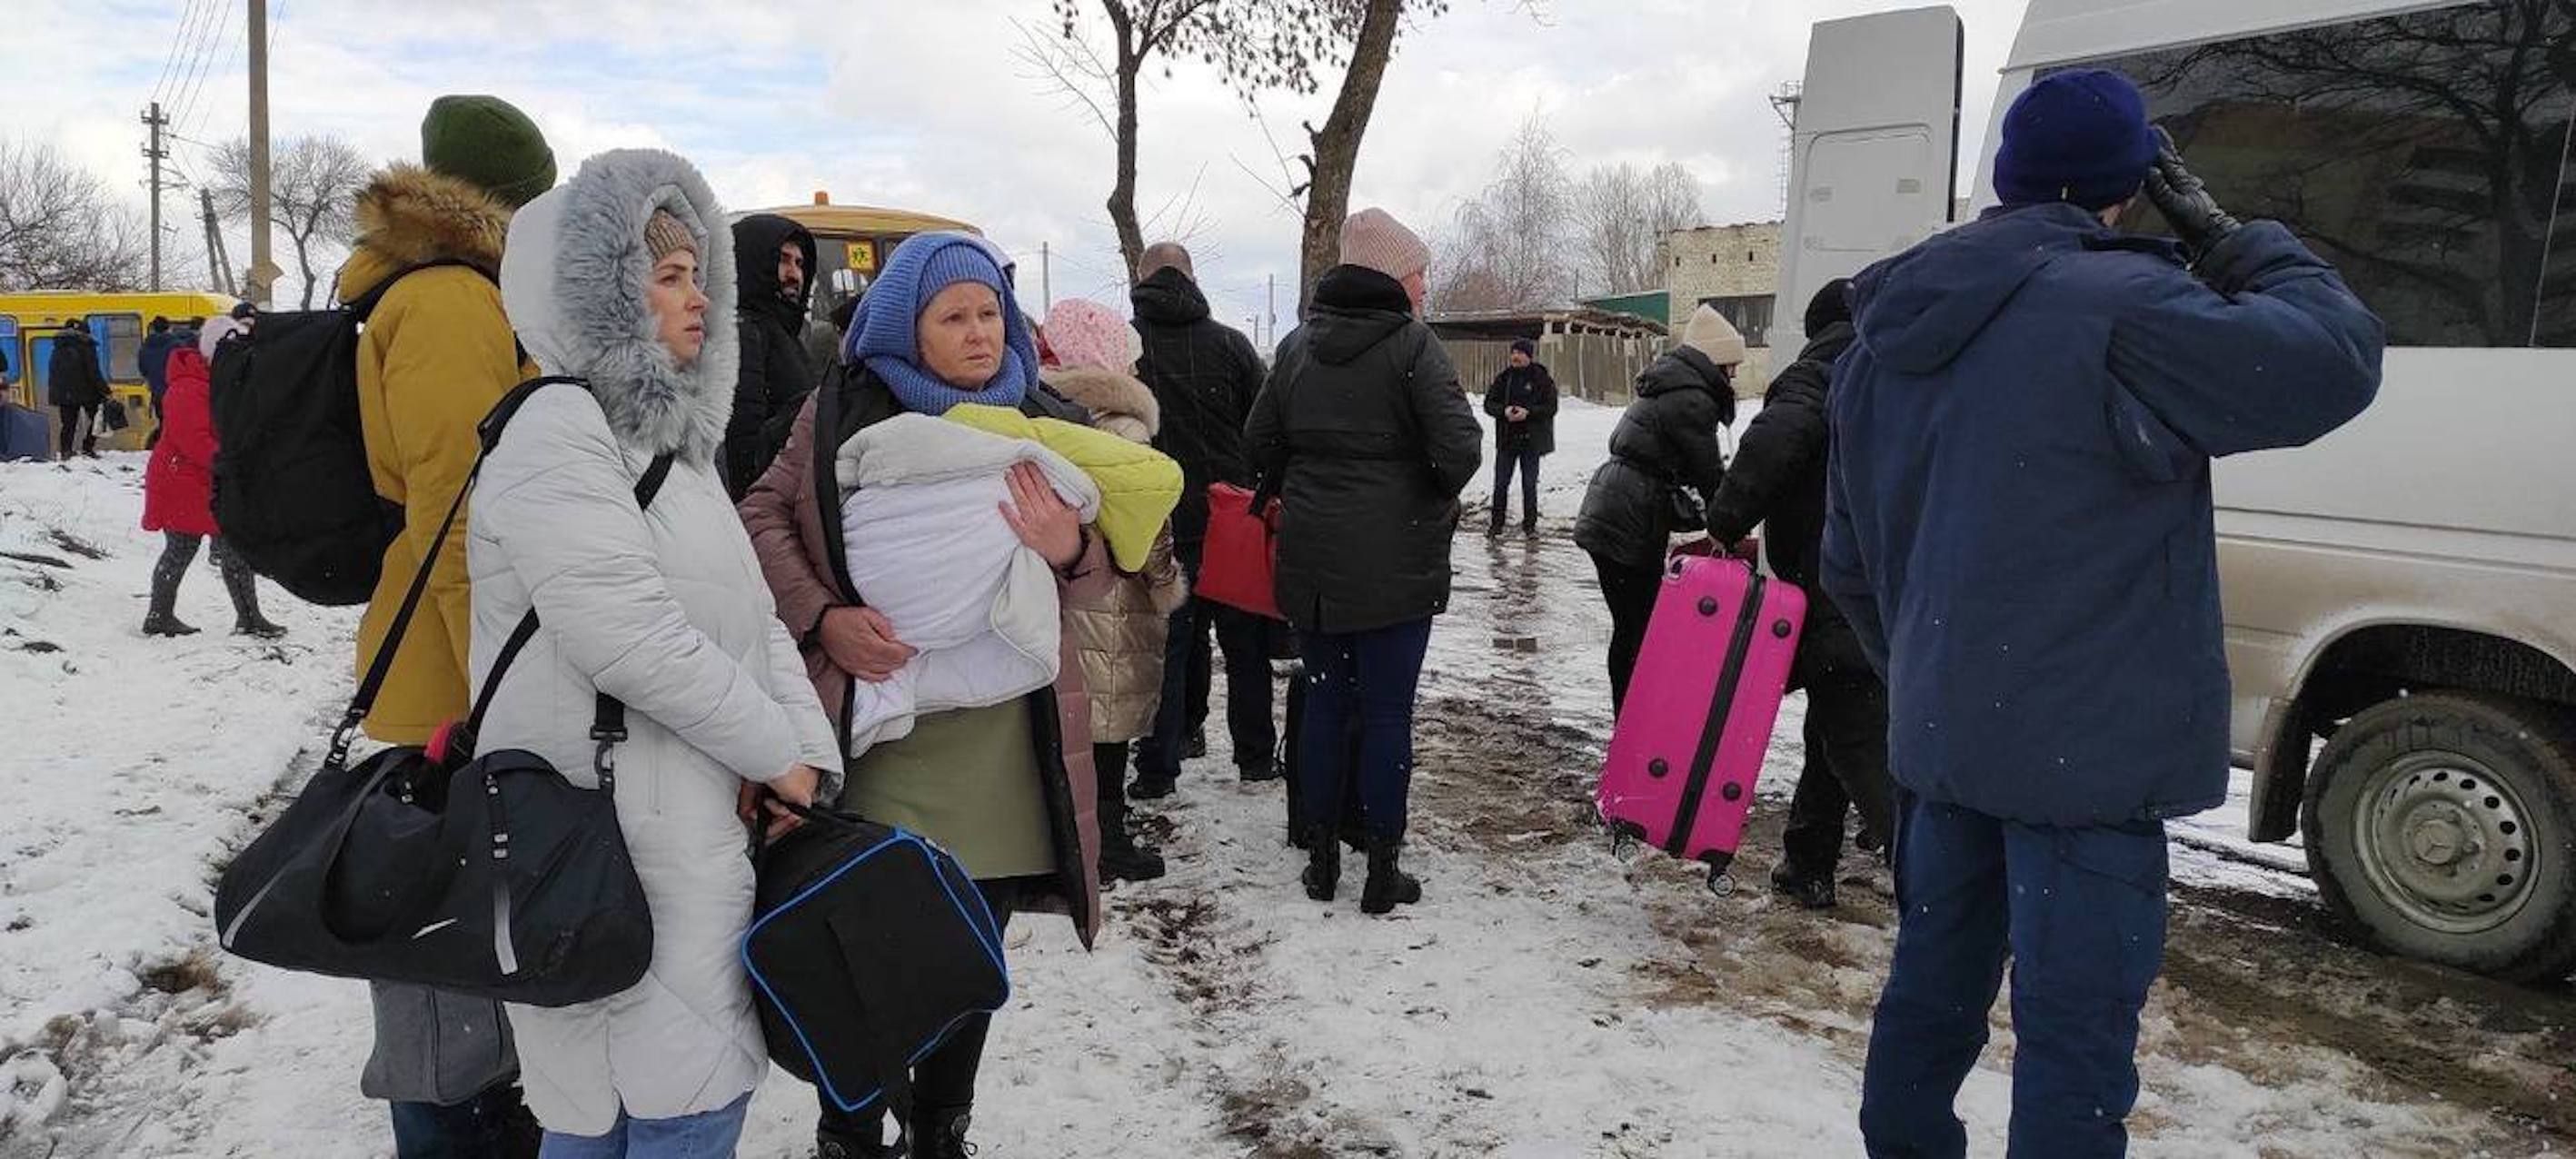  Civilians flee the city after temporary ceasefire announced on March 8, 2022 in Sumy, Ukraine.